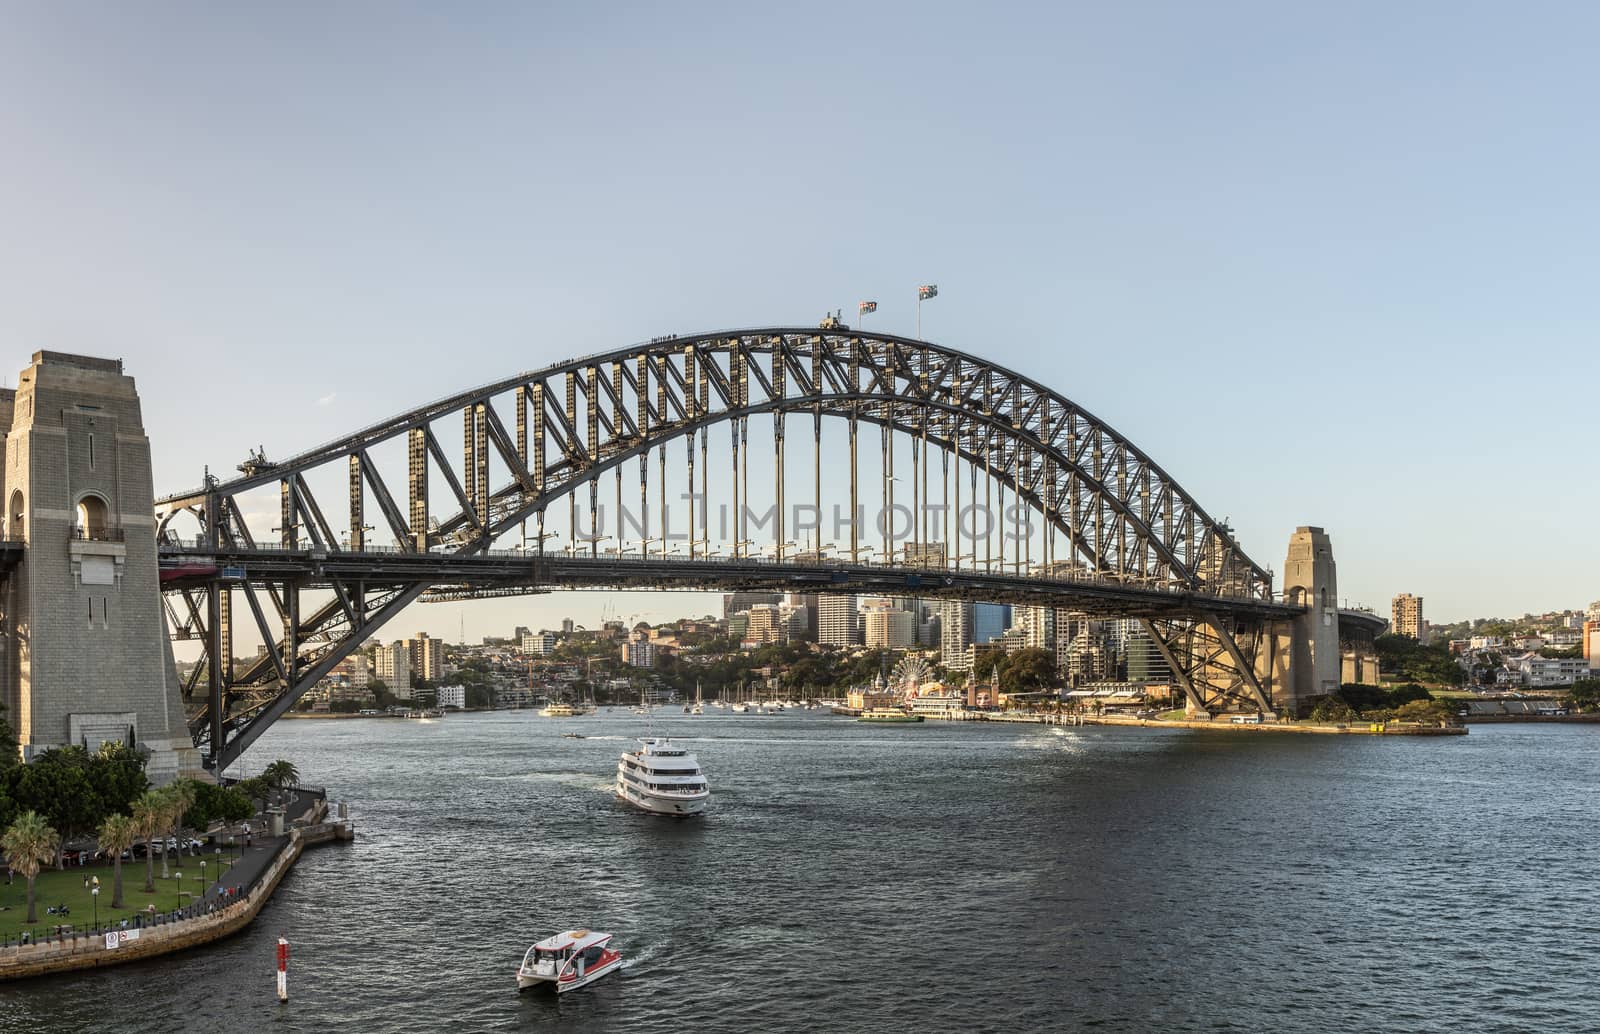 Sydney, Australia - February 12, 2019: Harbour bridge against pale blue sky during sunset. Horizon is north shore of bay with Kirribilli neighborhood and Luna Park. Boats on water.